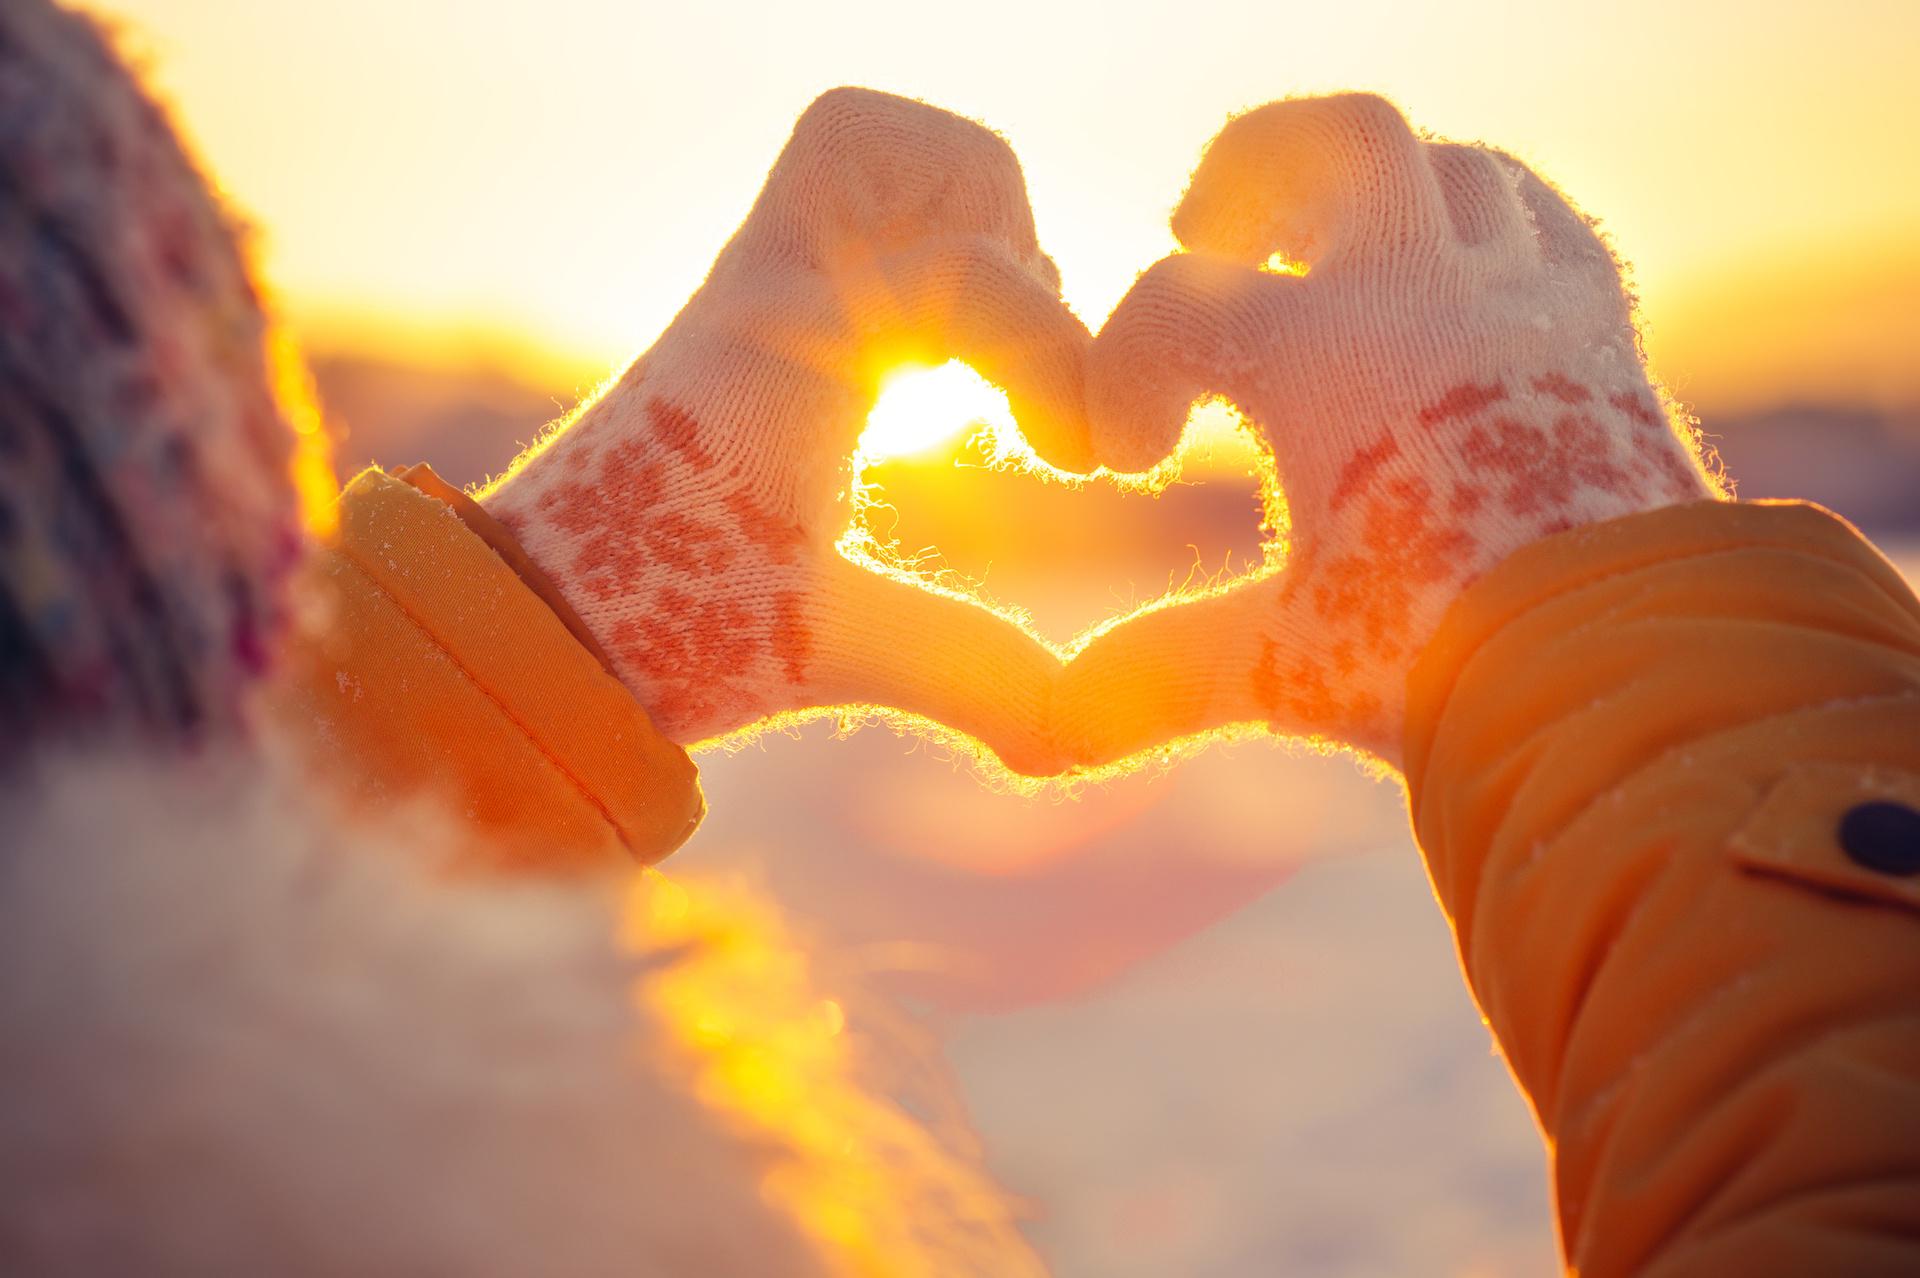 Woman hands in winter gloves Heart symbol with sunset light nature on background